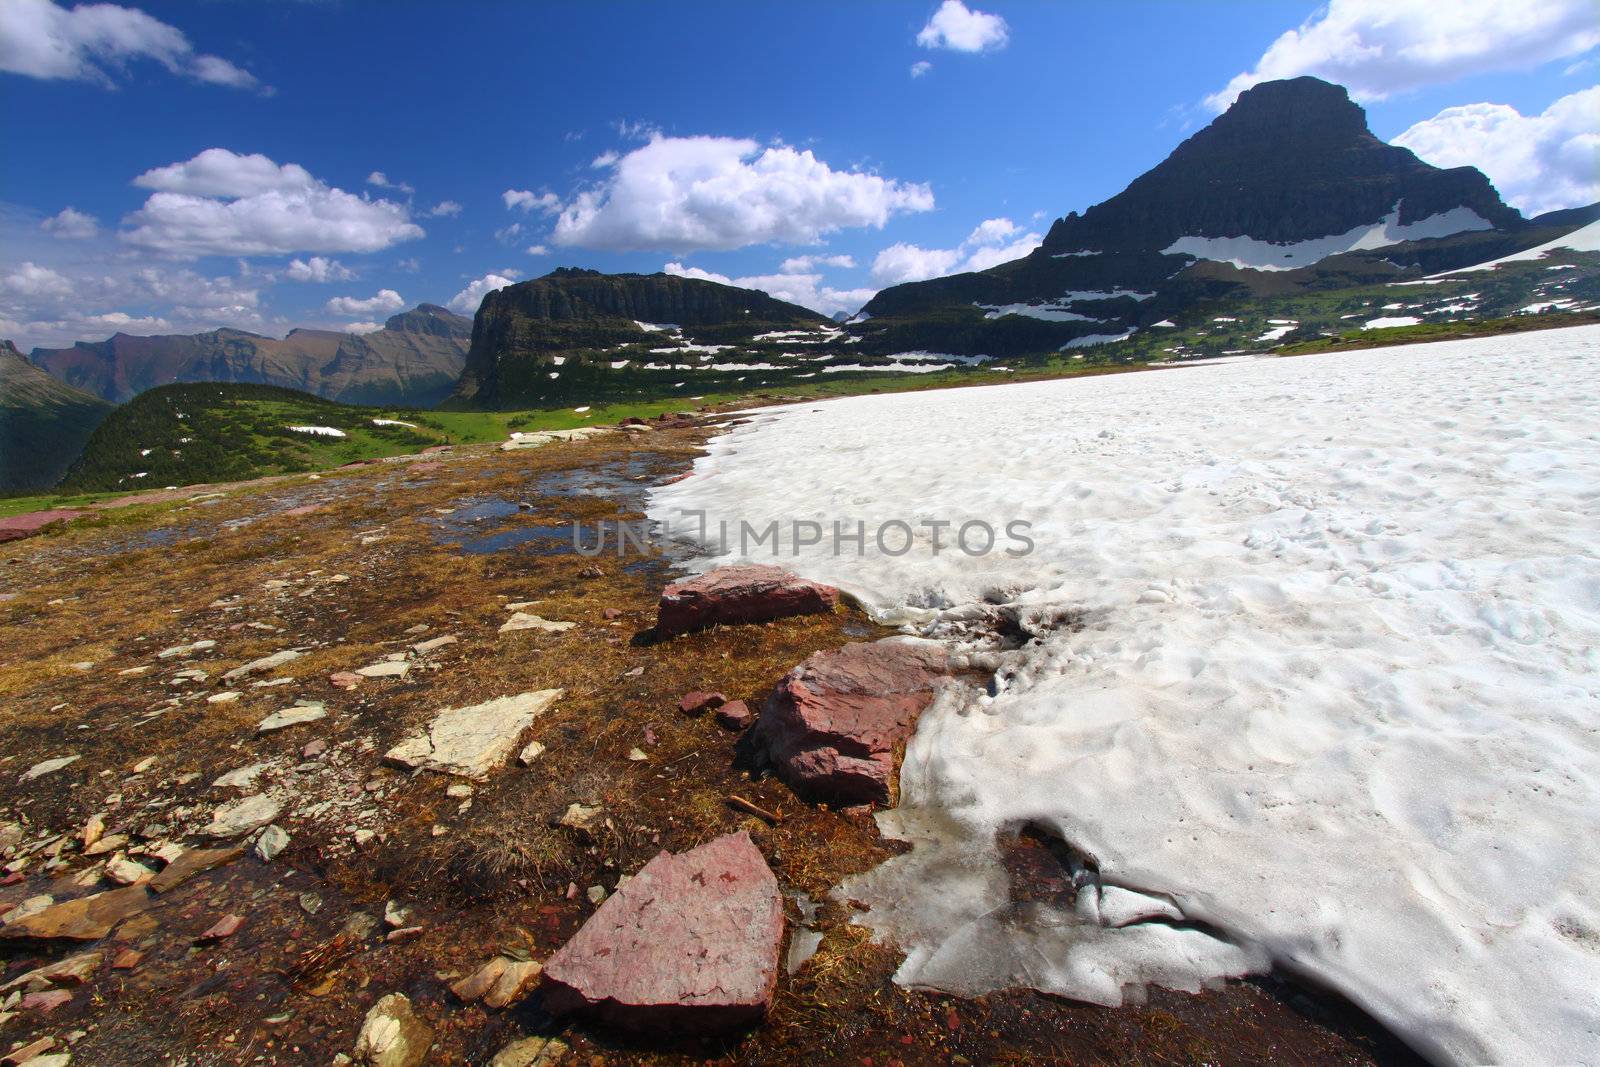 Snow remains even in late August at Logan Pass of Glacier National Park - USA.